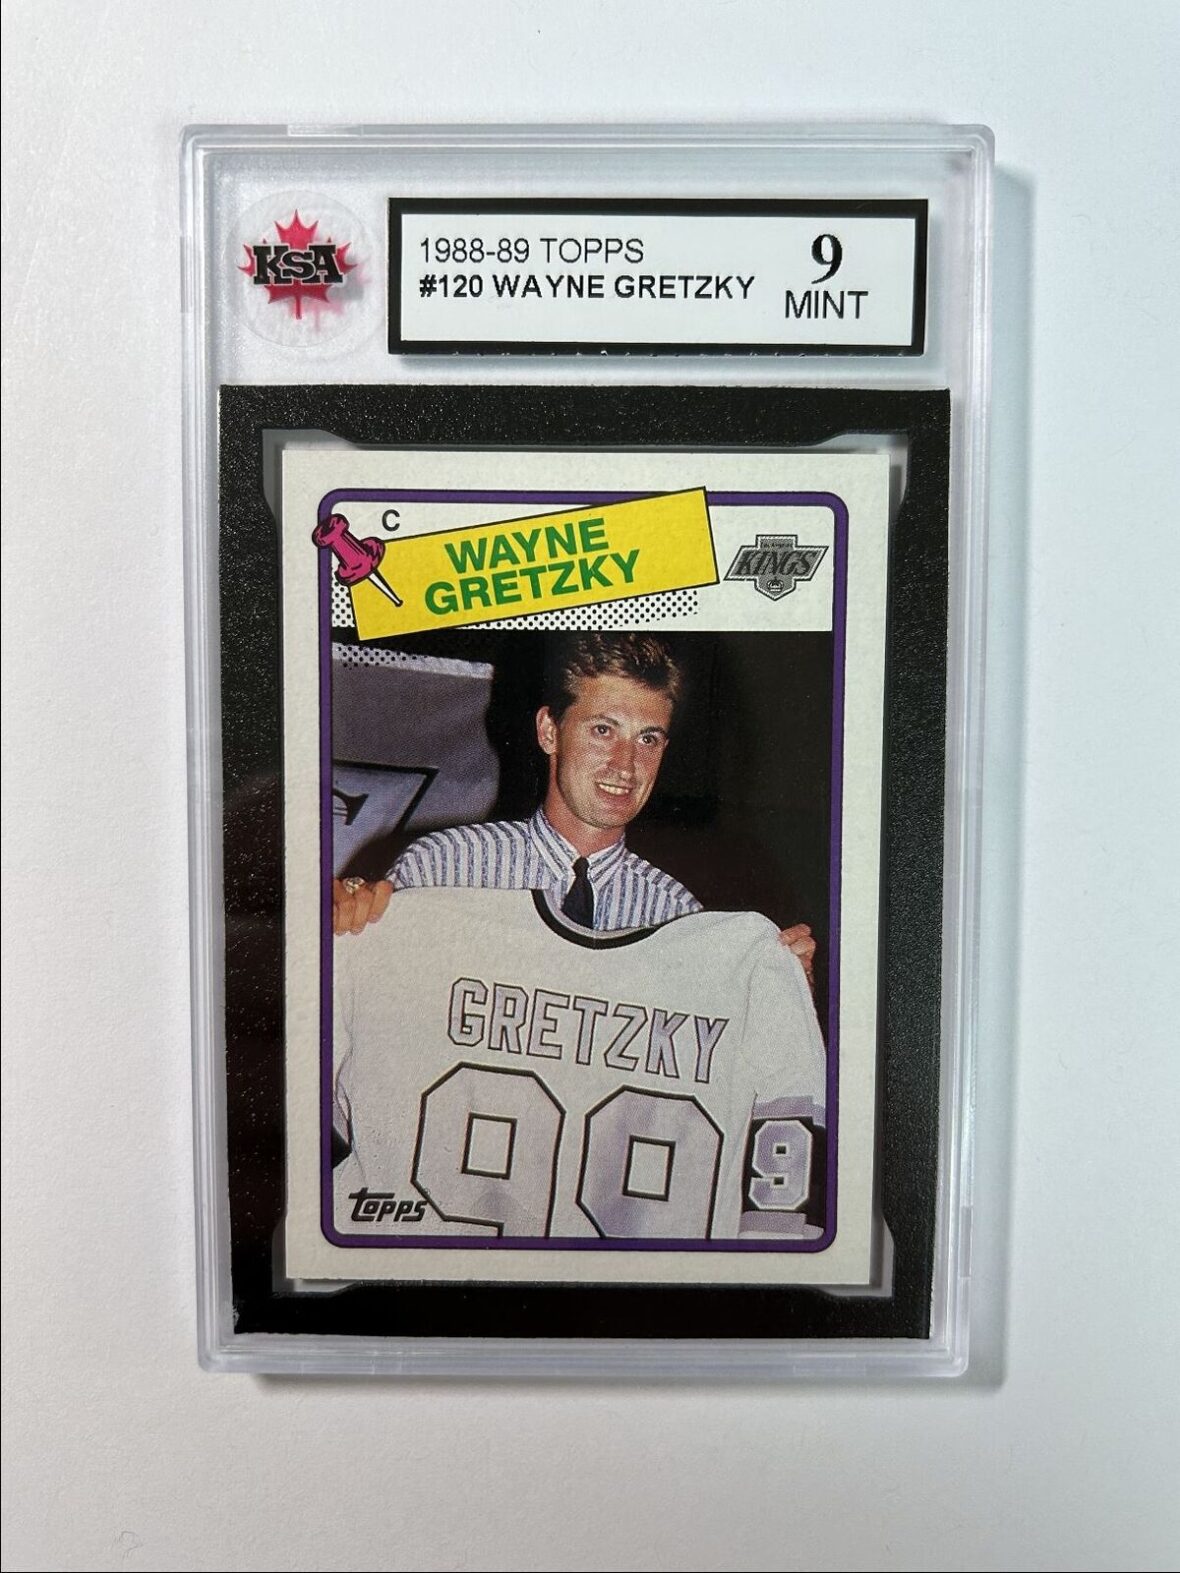 Top 25 Highest-Selling Hockey Cards from the Junk Wax Era on eBay (July 2023)